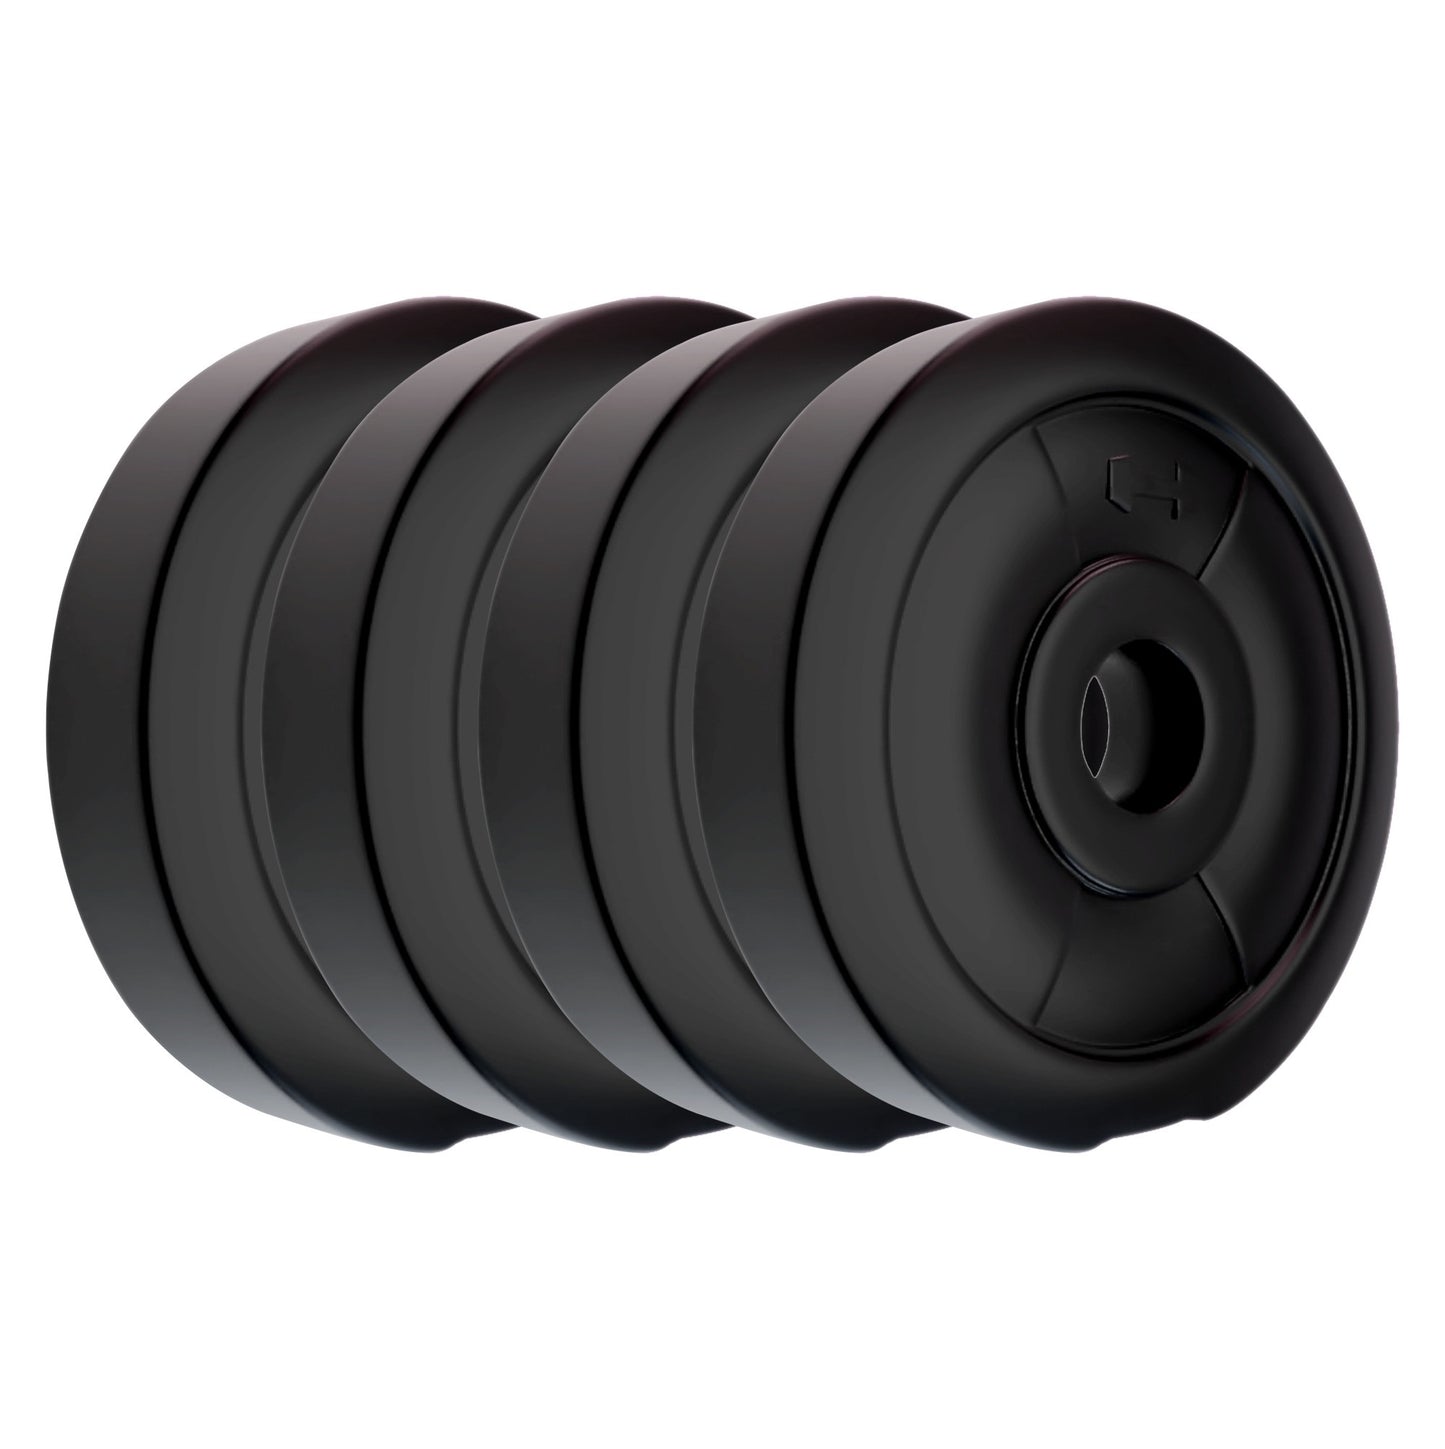 Kore PVC 10-40 Kg Spare Weight Plates Combo